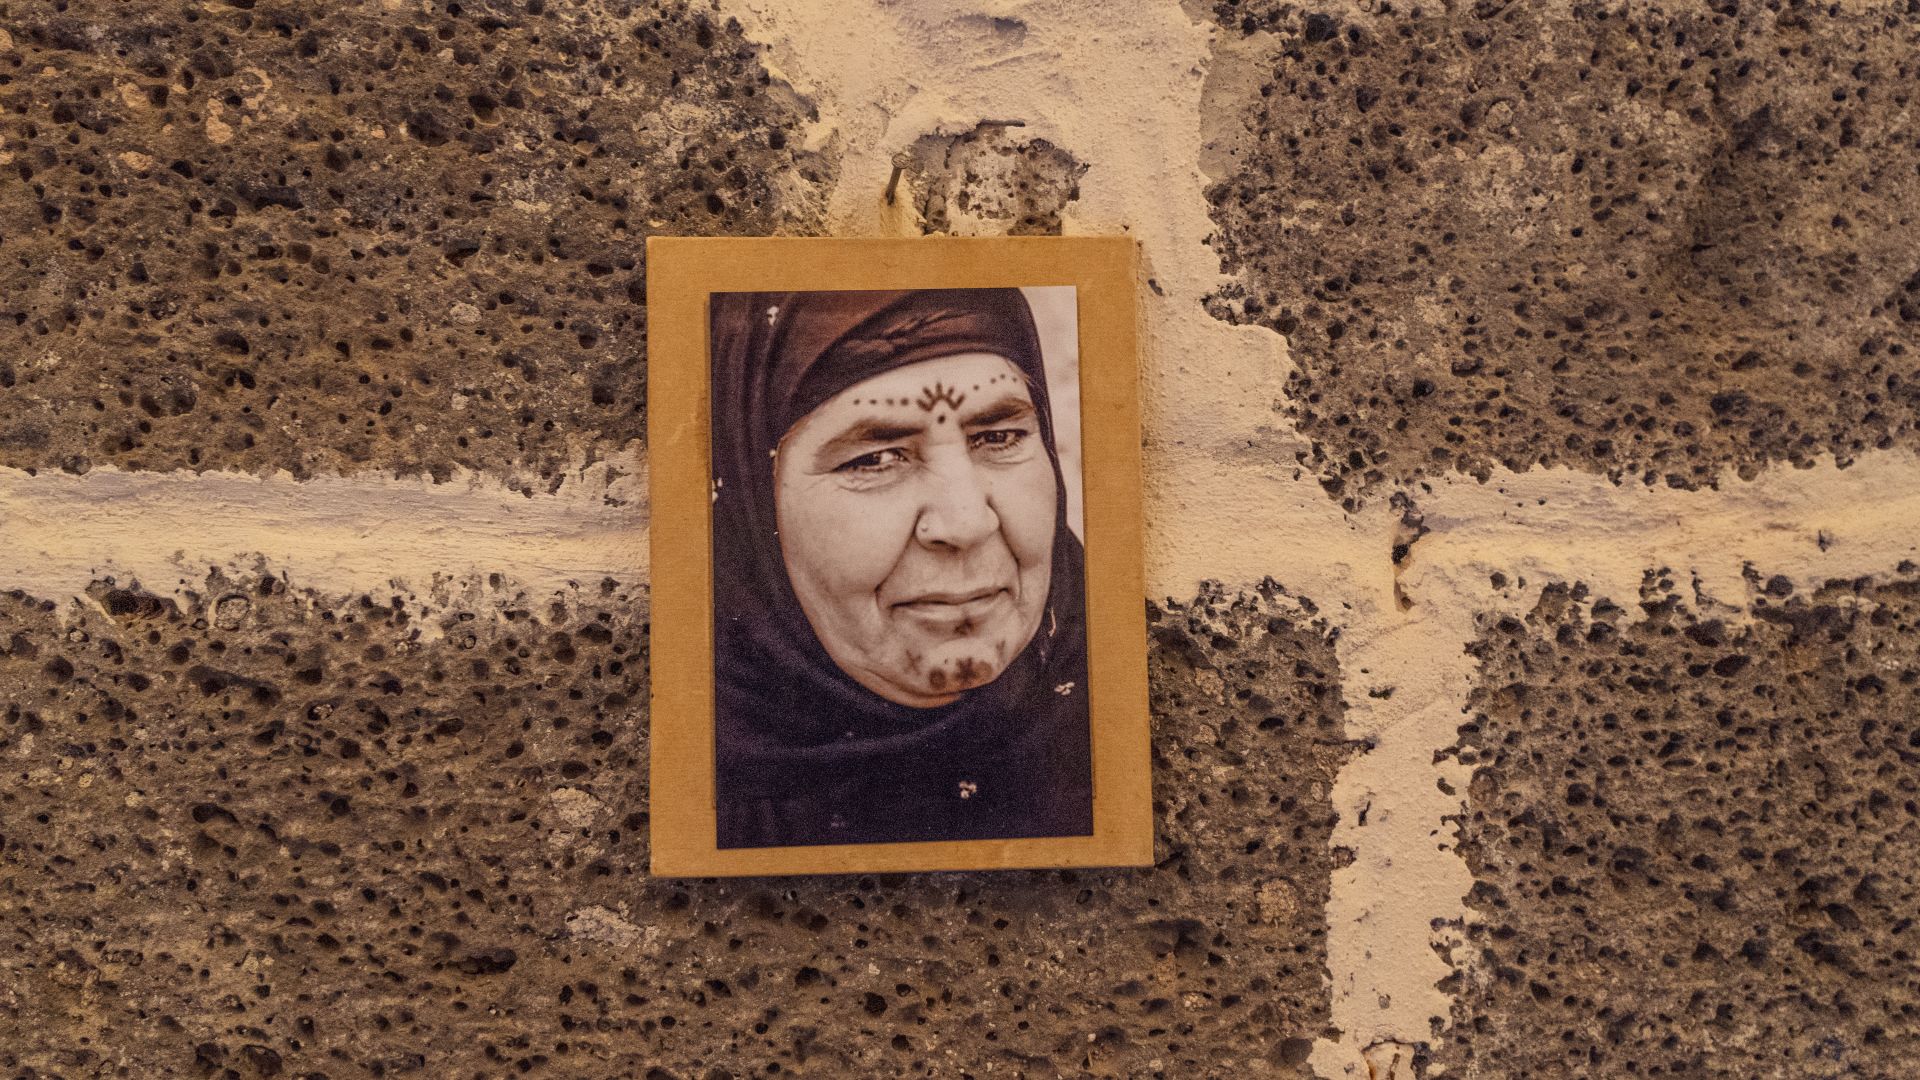 A photo of a photo hanging in Temel’s studio, showing an elderly woman adorning a symbolic sun motif on her forehead.